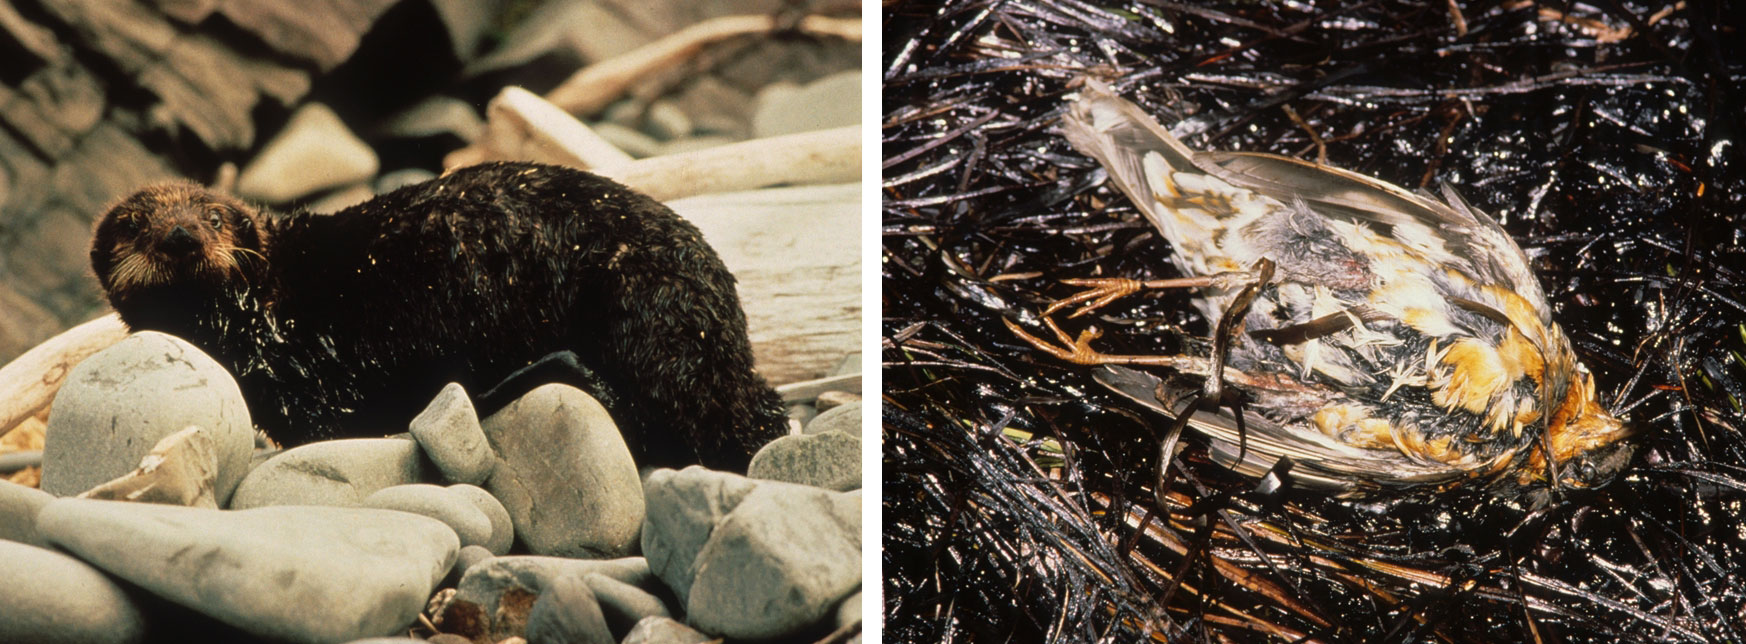 2-panel image showing photographs of animals affected by the Exxon Valdez oil spill. Panel 1: A sea otter with oil in its fur. Panel 2: An dead bird that was oiled laying on grass that is black with oil.